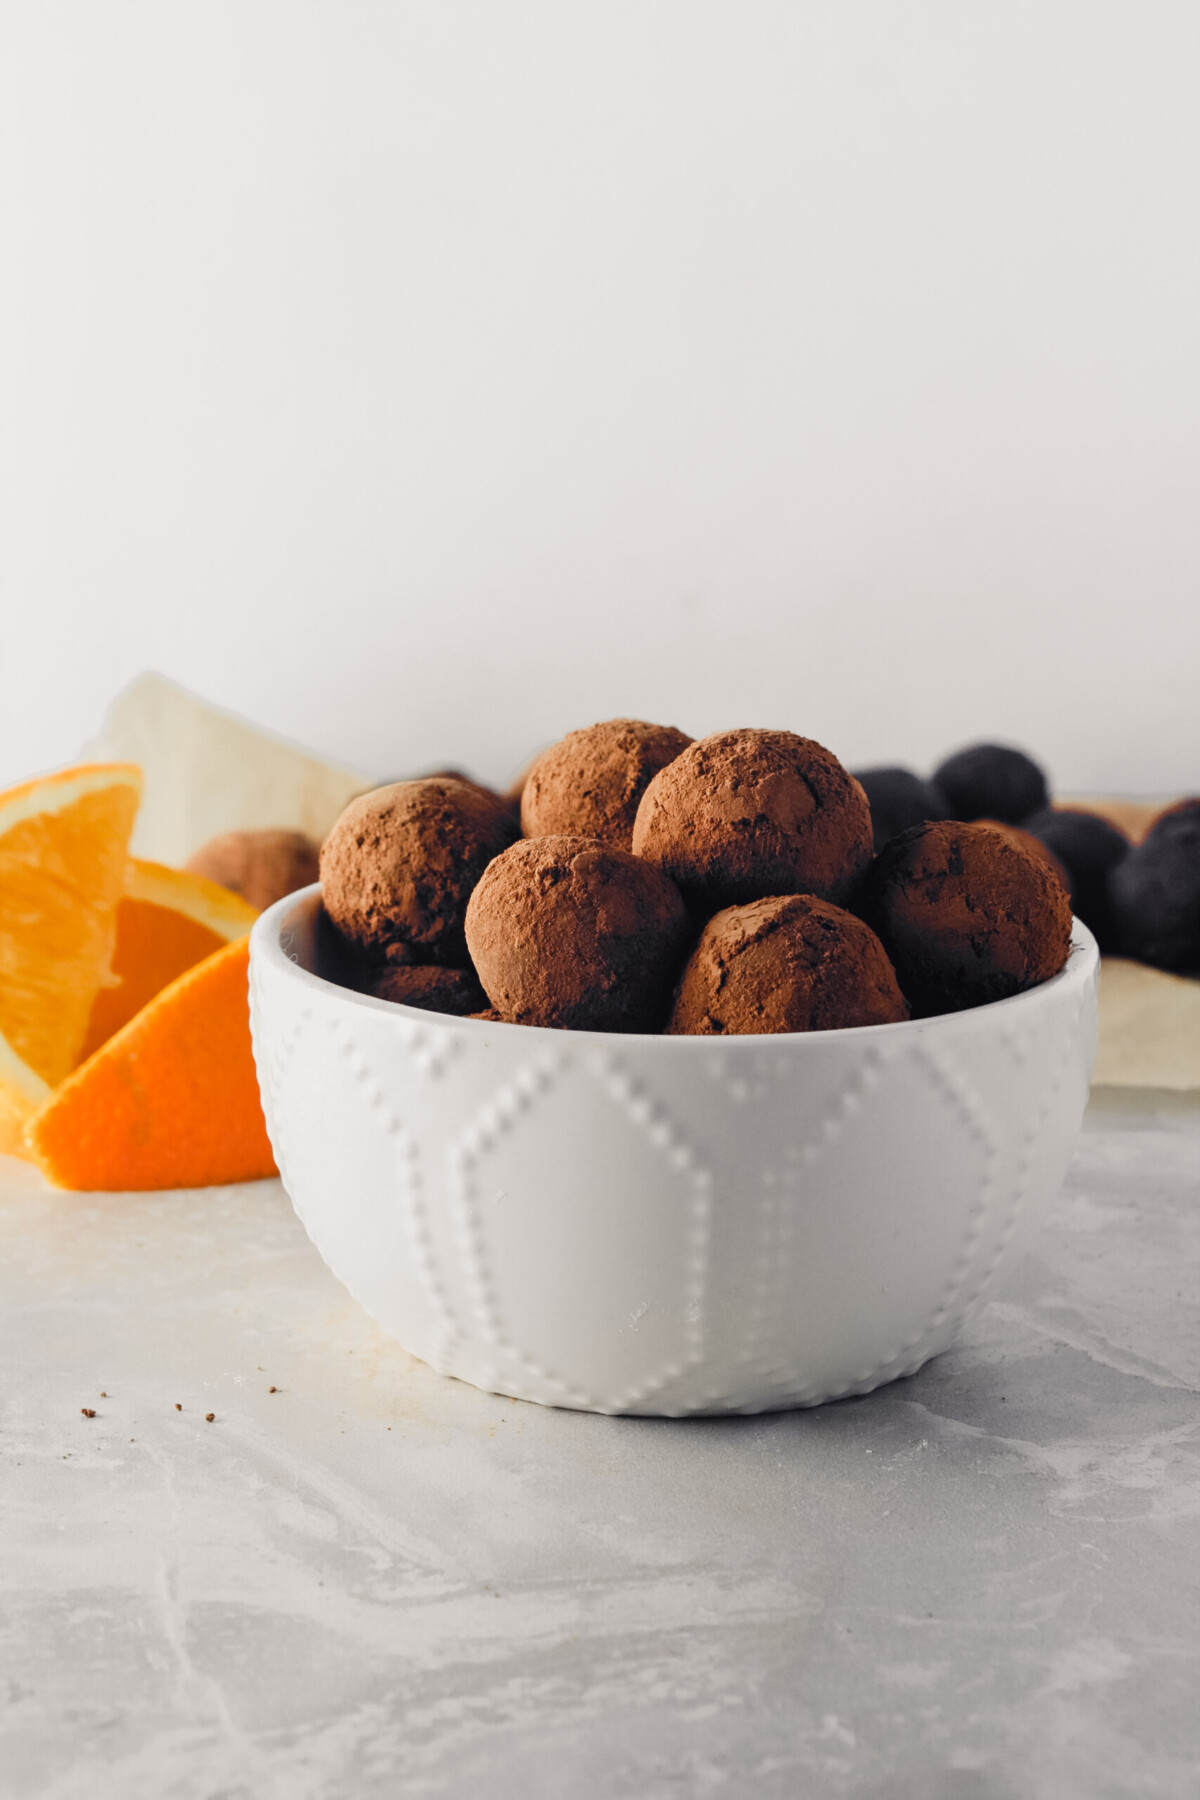 Photograph of vegan dark chocolate truffles stacked in a white bowl, one with a bite taken out of it.